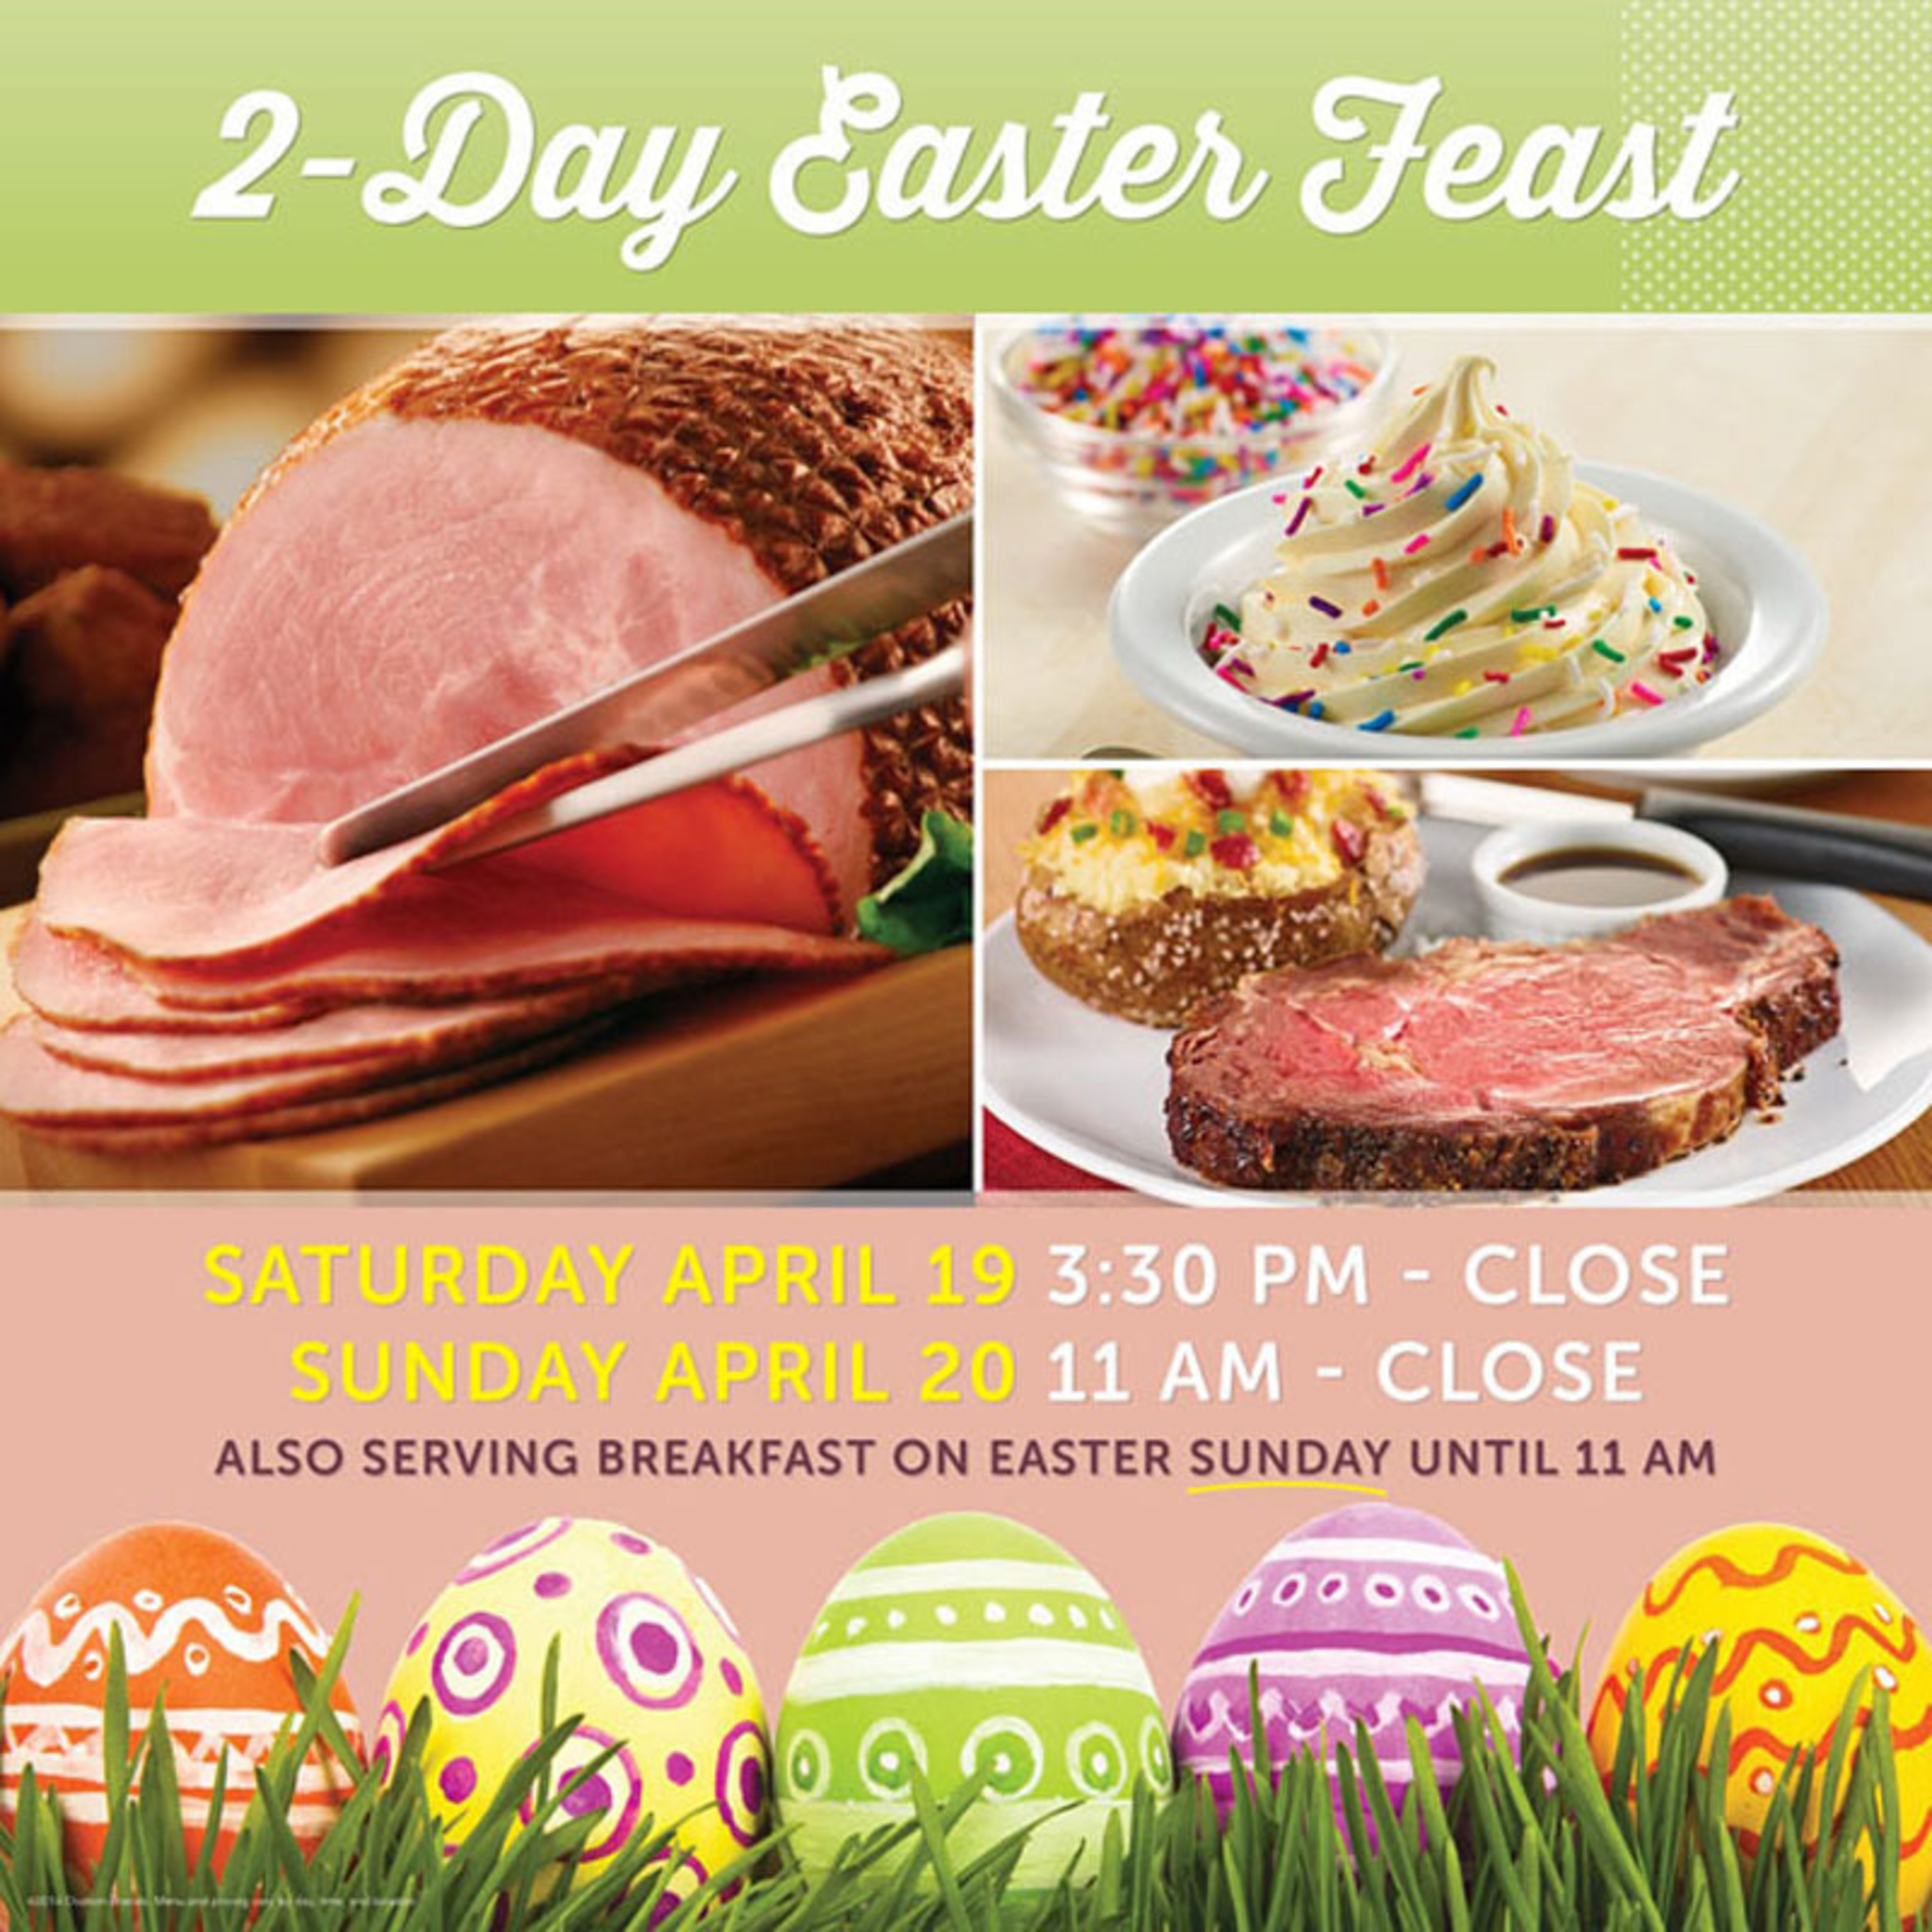 Celebrate Easter with Ryan's, HomeTown Buffet and Old Country Buffet as they serve up family favorites all weekend long. (PRNewsFoto/Ovation Brands) (PRNewsFoto/OVATION BRANDS)